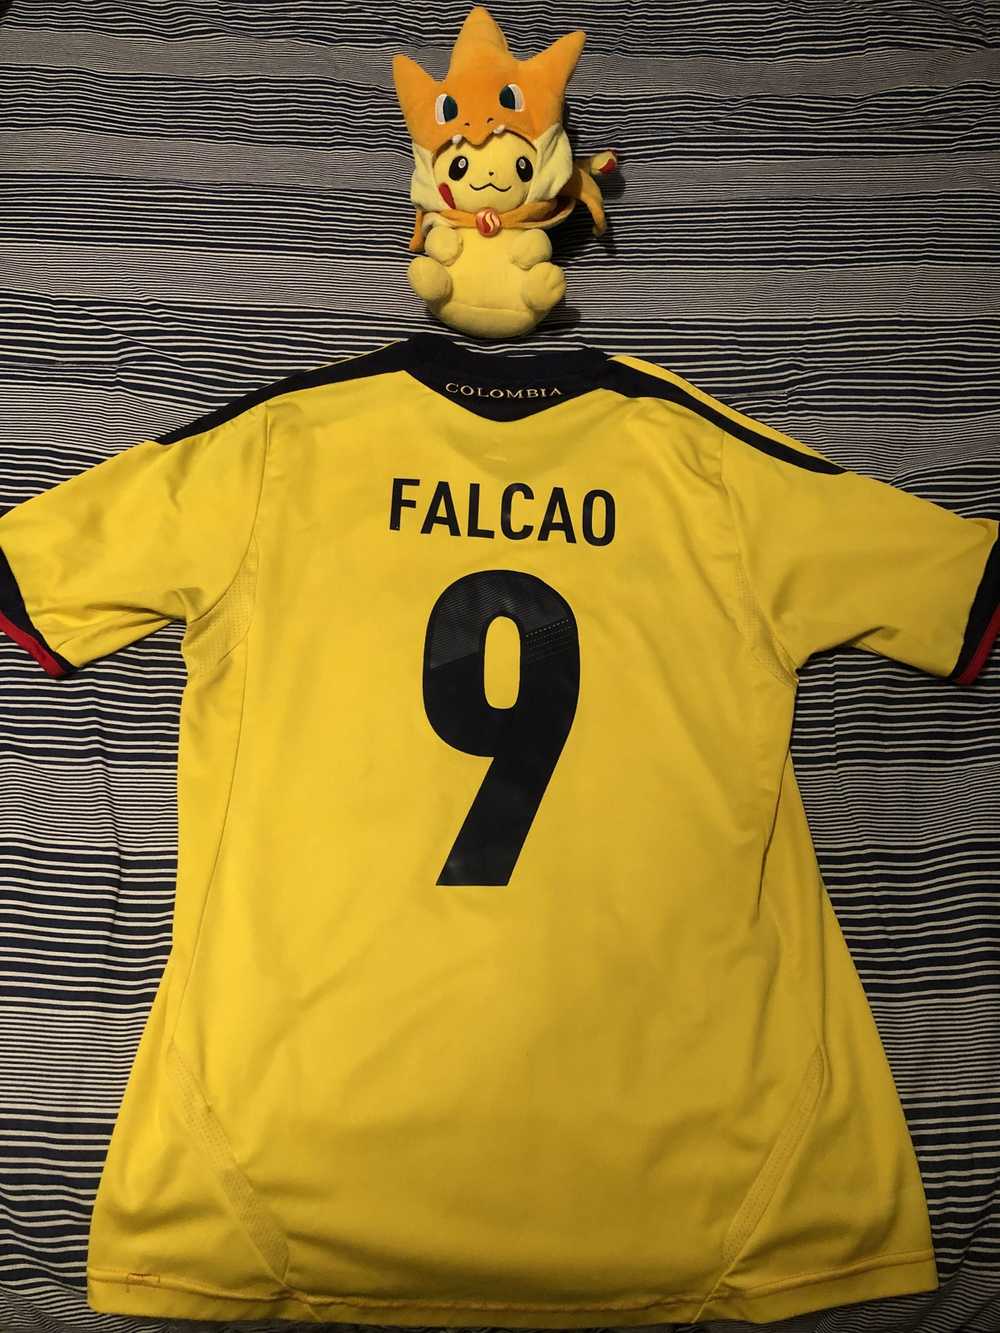 Adidas Colombia 2013 Jersey - image 1